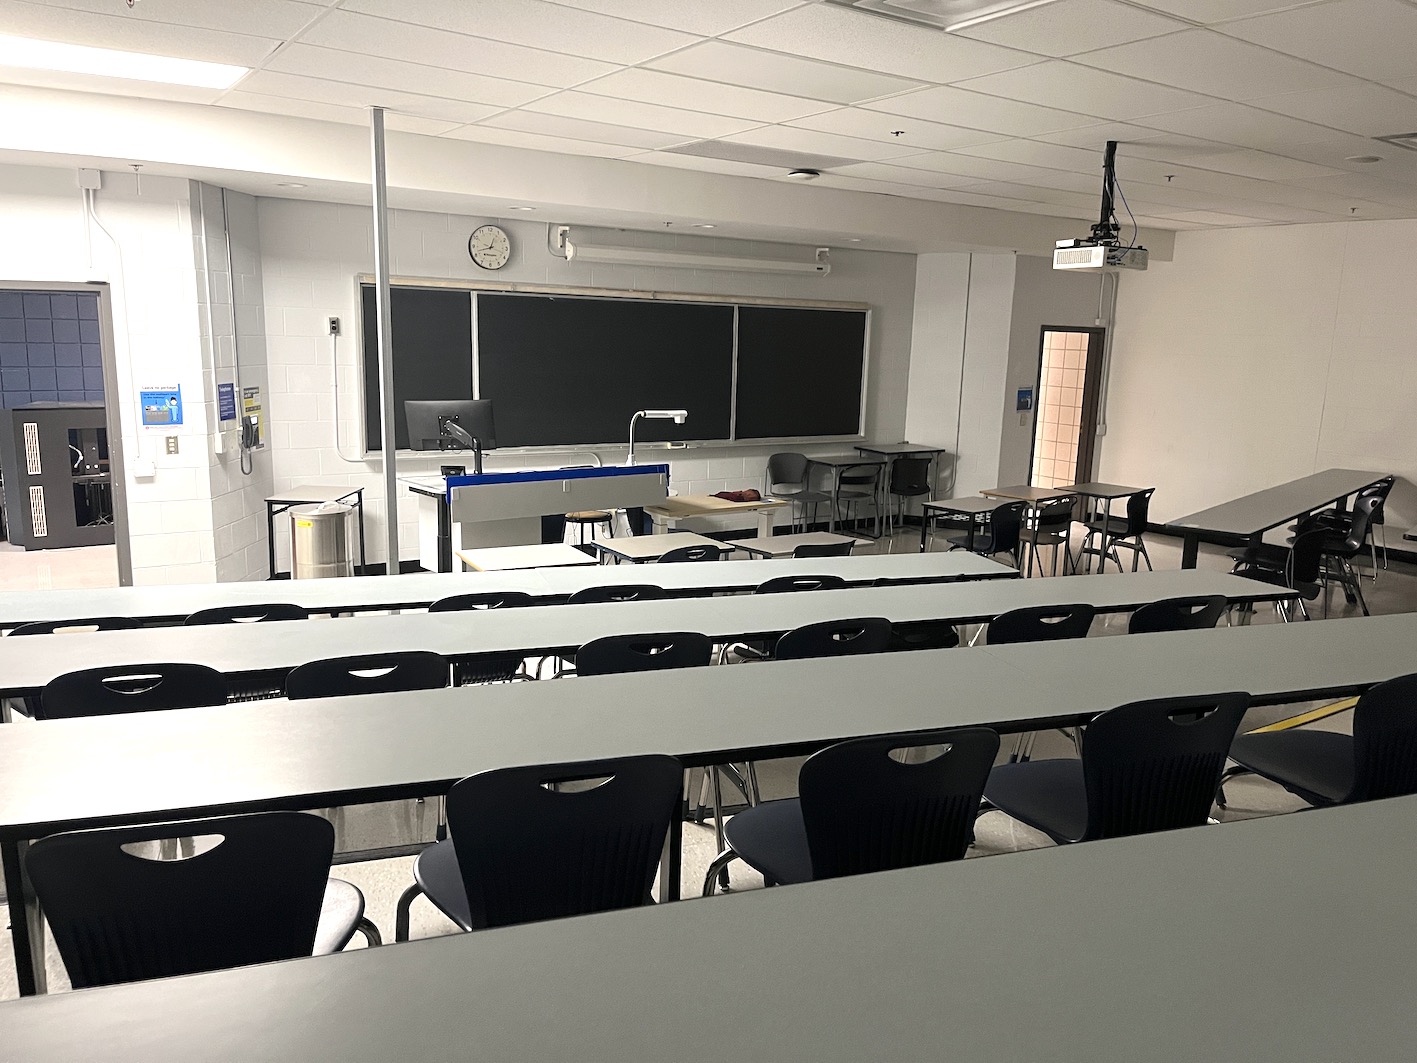 Instructor's view of classroom in Eric Palin Hall at Ryerson prior to renovations